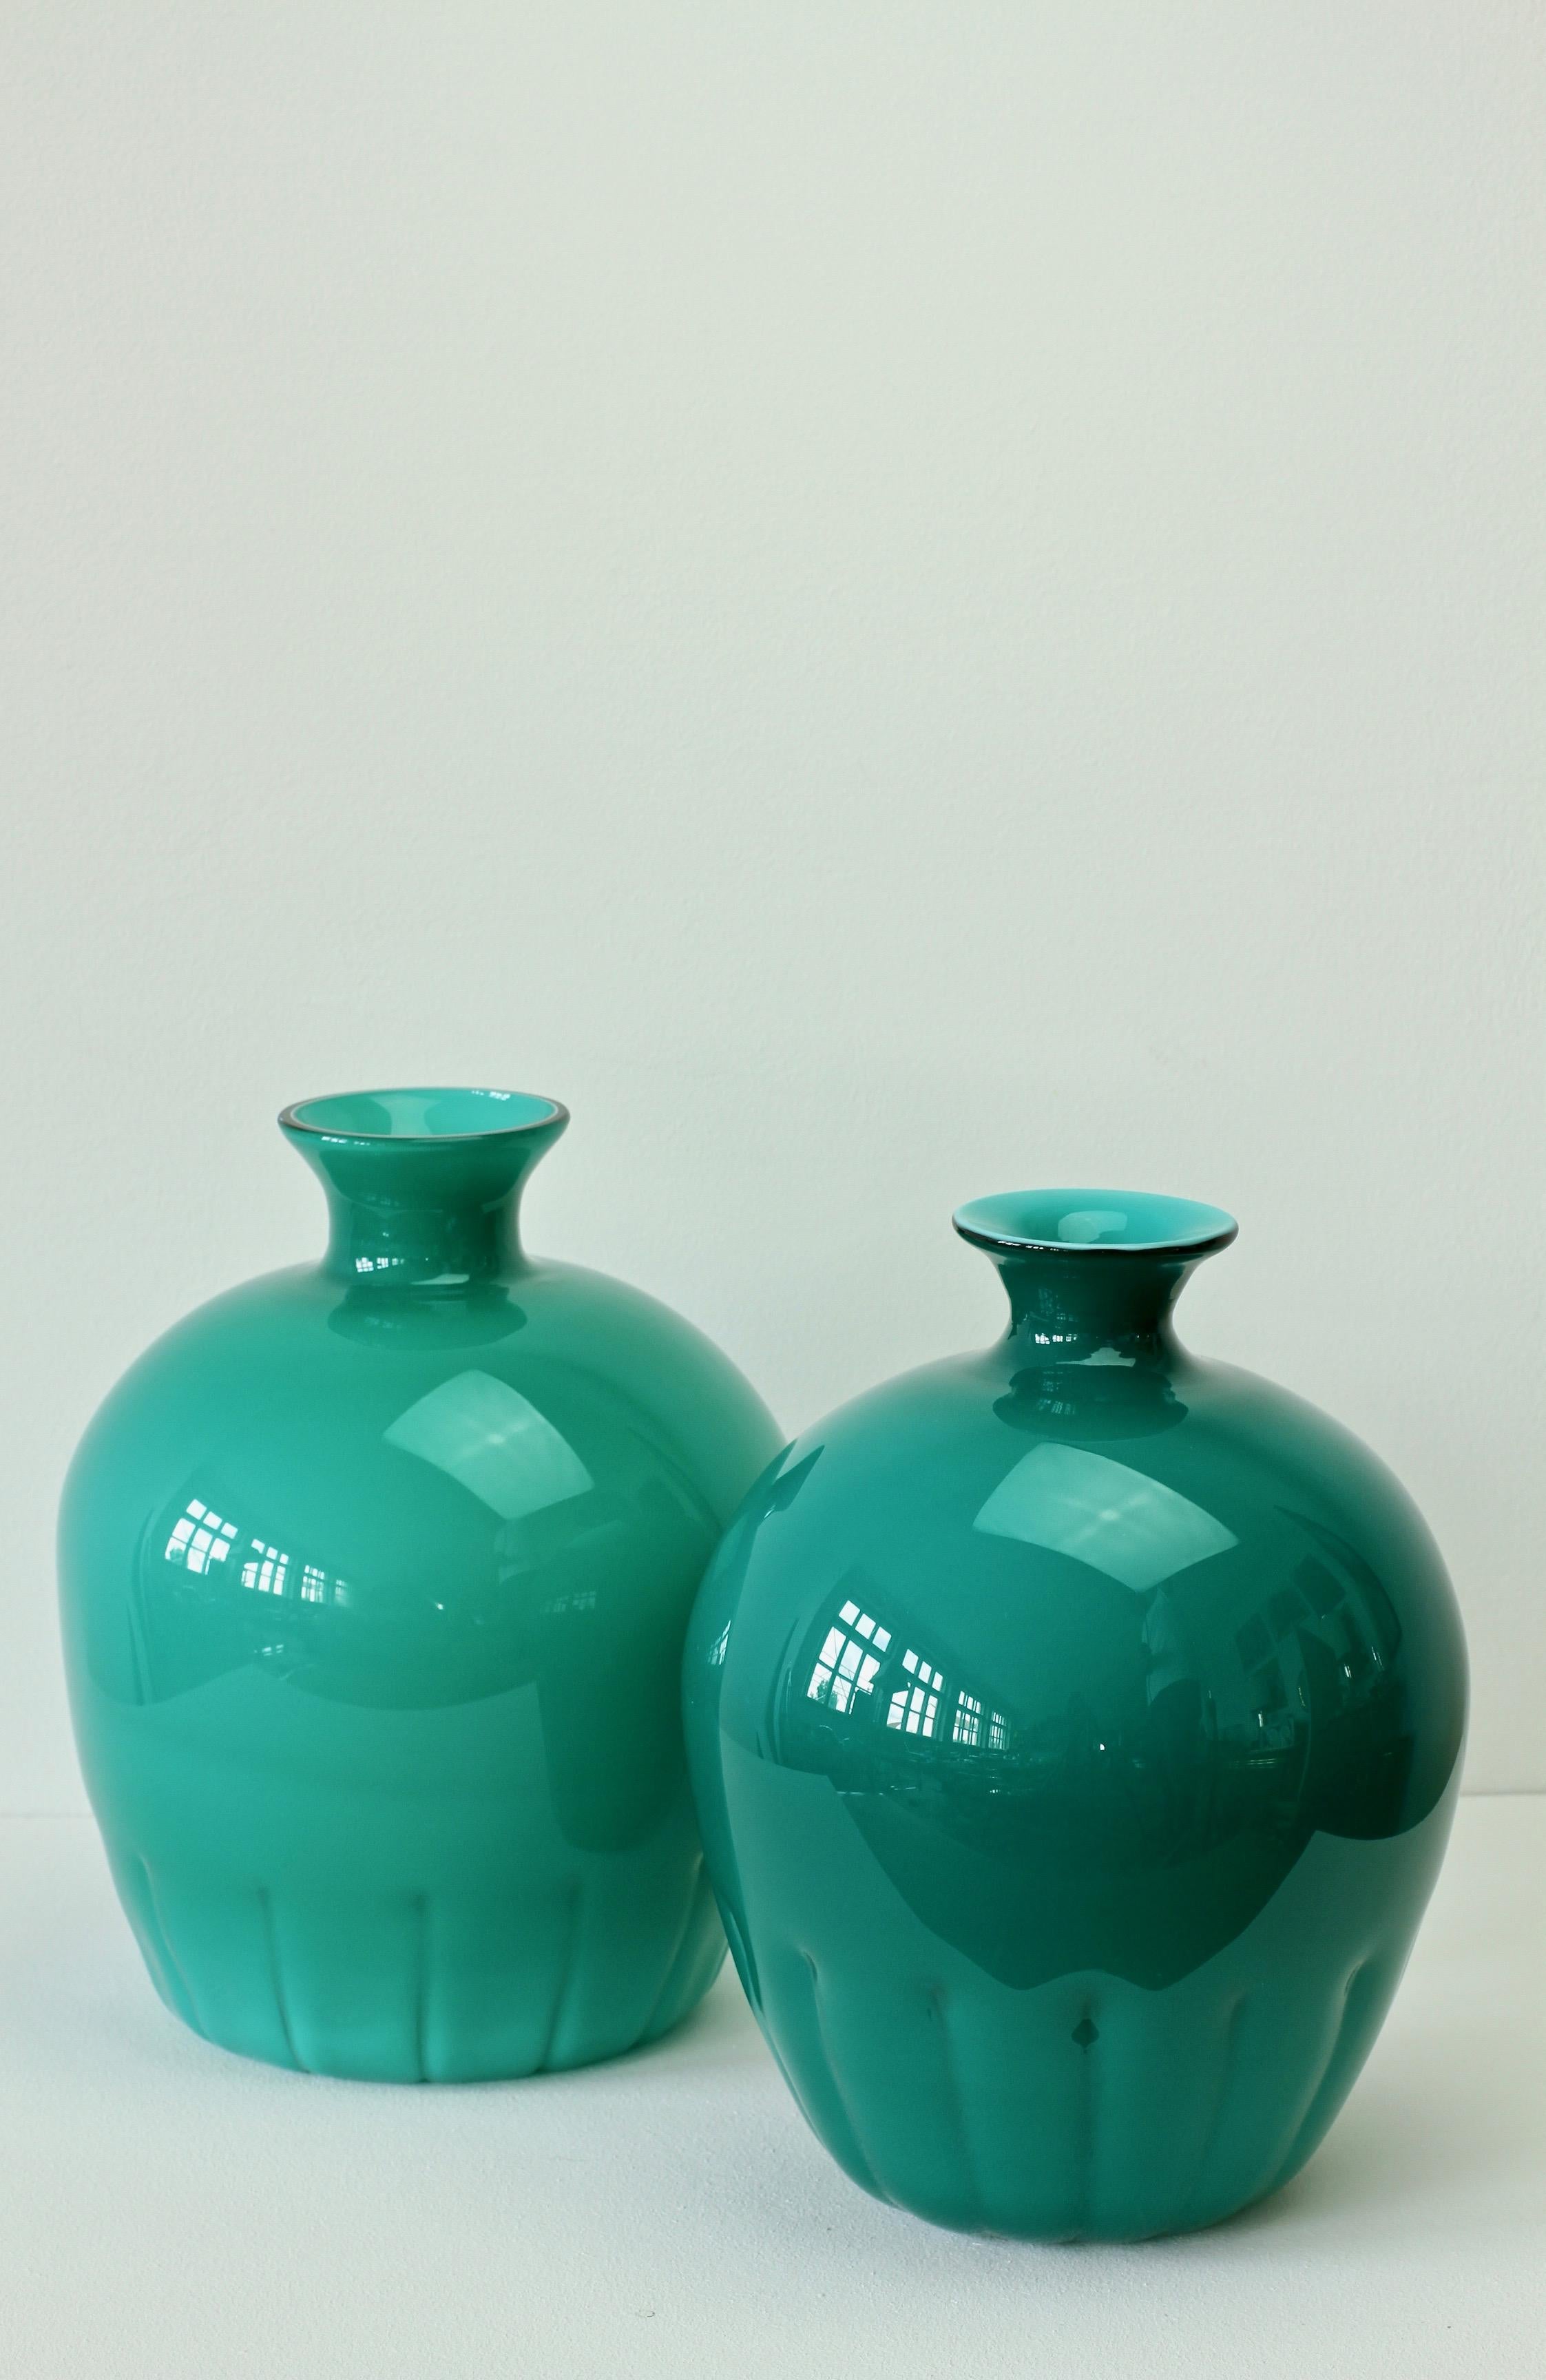 Colorful (colorful) pair, group or ensemble of midcentury teal green vases by Cenedese Vetri of Murano, Italy, circa 1970s-1990s. Particularly striking is the narrow necked round form with rippled bases, very similar to Napoleone Martinuzzi bowls